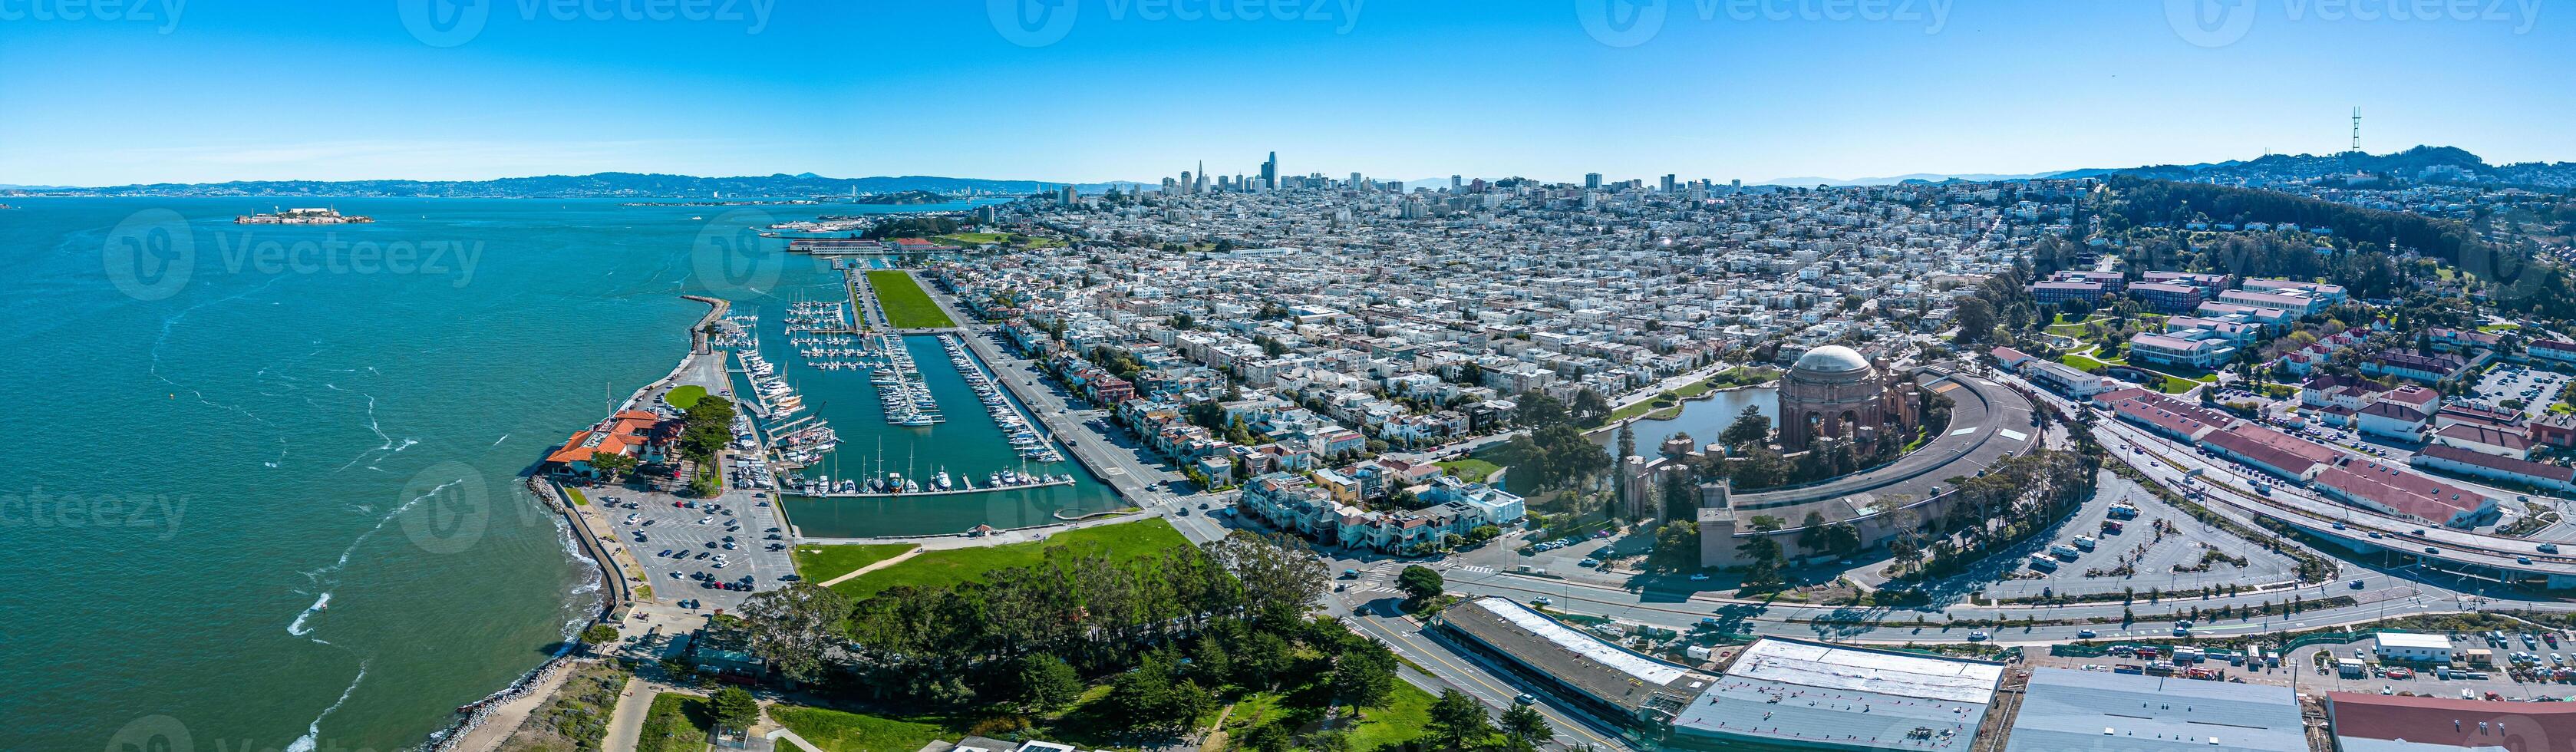 San Francisco Aerial view of the coast piers and townton from Marina Green photo